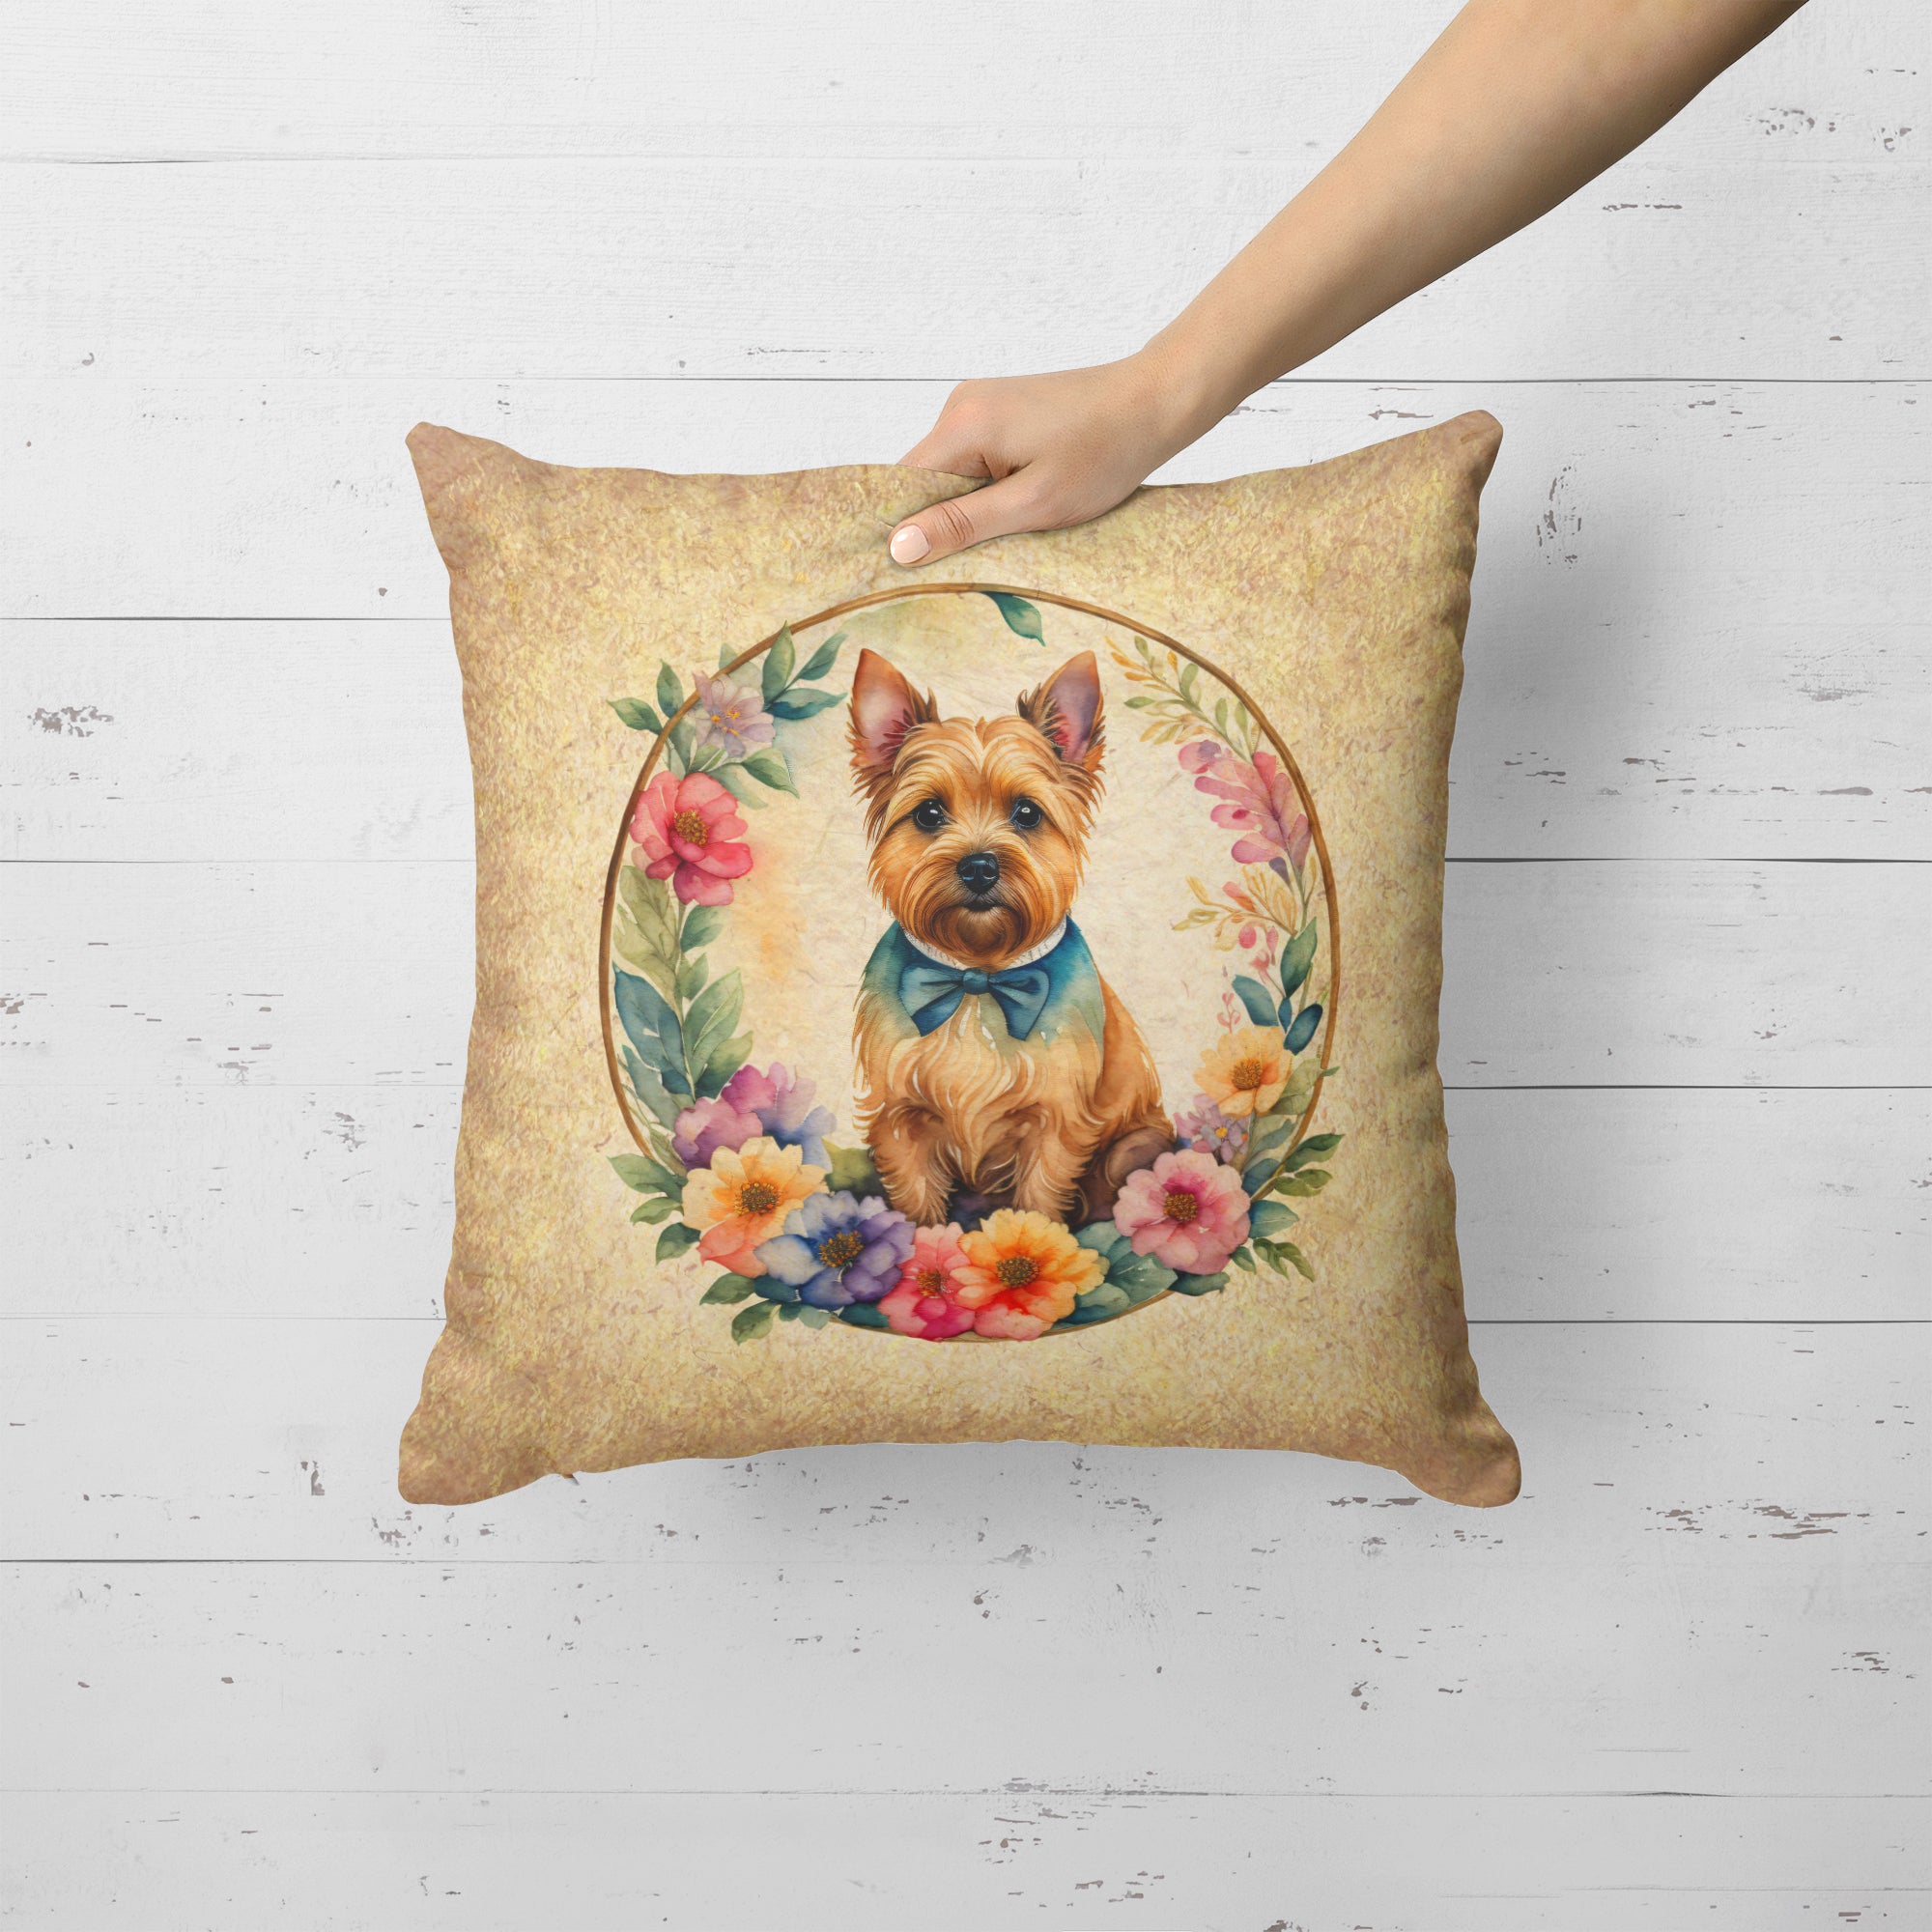 Buy this Norwich Terrier and Flowers Fabric Decorative Pillow